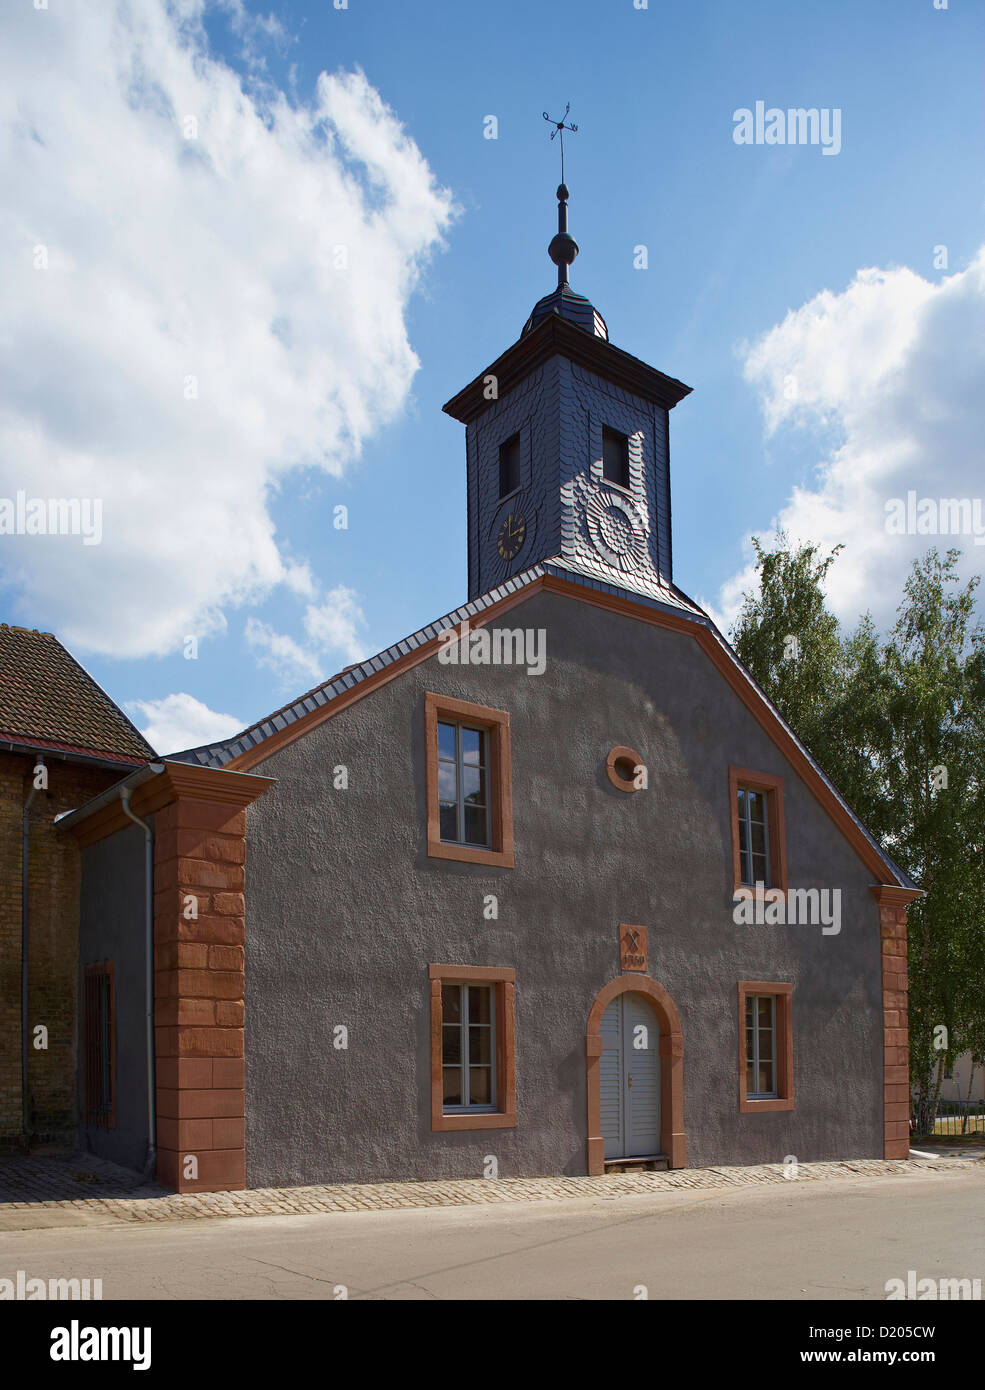 Alte Schmelz, Old Smelting Works, church from 1750 in the sunlight, St. Ingbert, Saarland, Germany, Europe Stock Photo